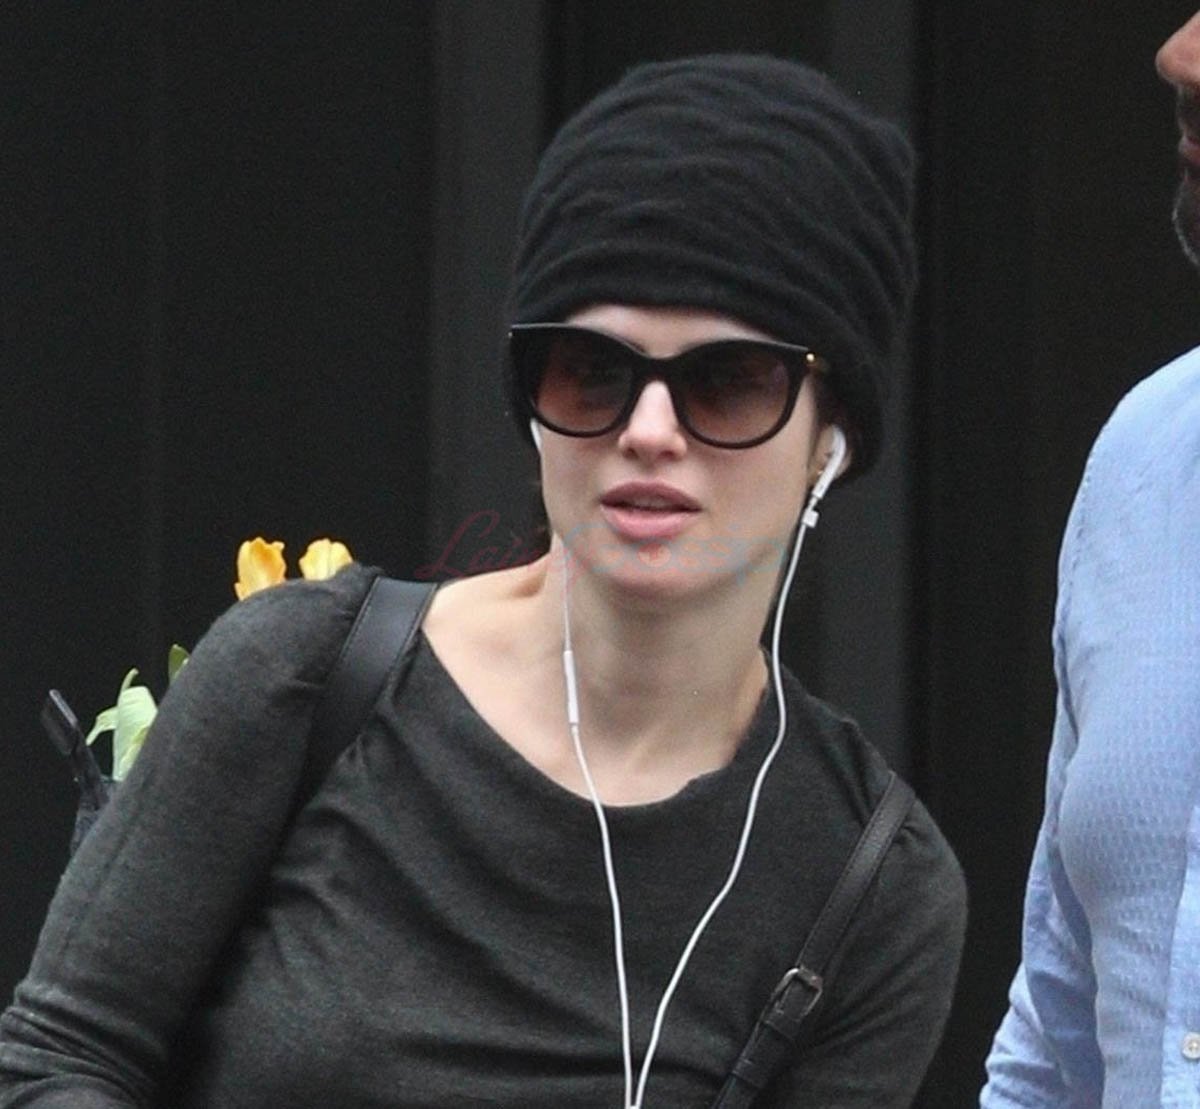 Dr Neri Oxman papped for first time since Brad Pitt relationship rumours started